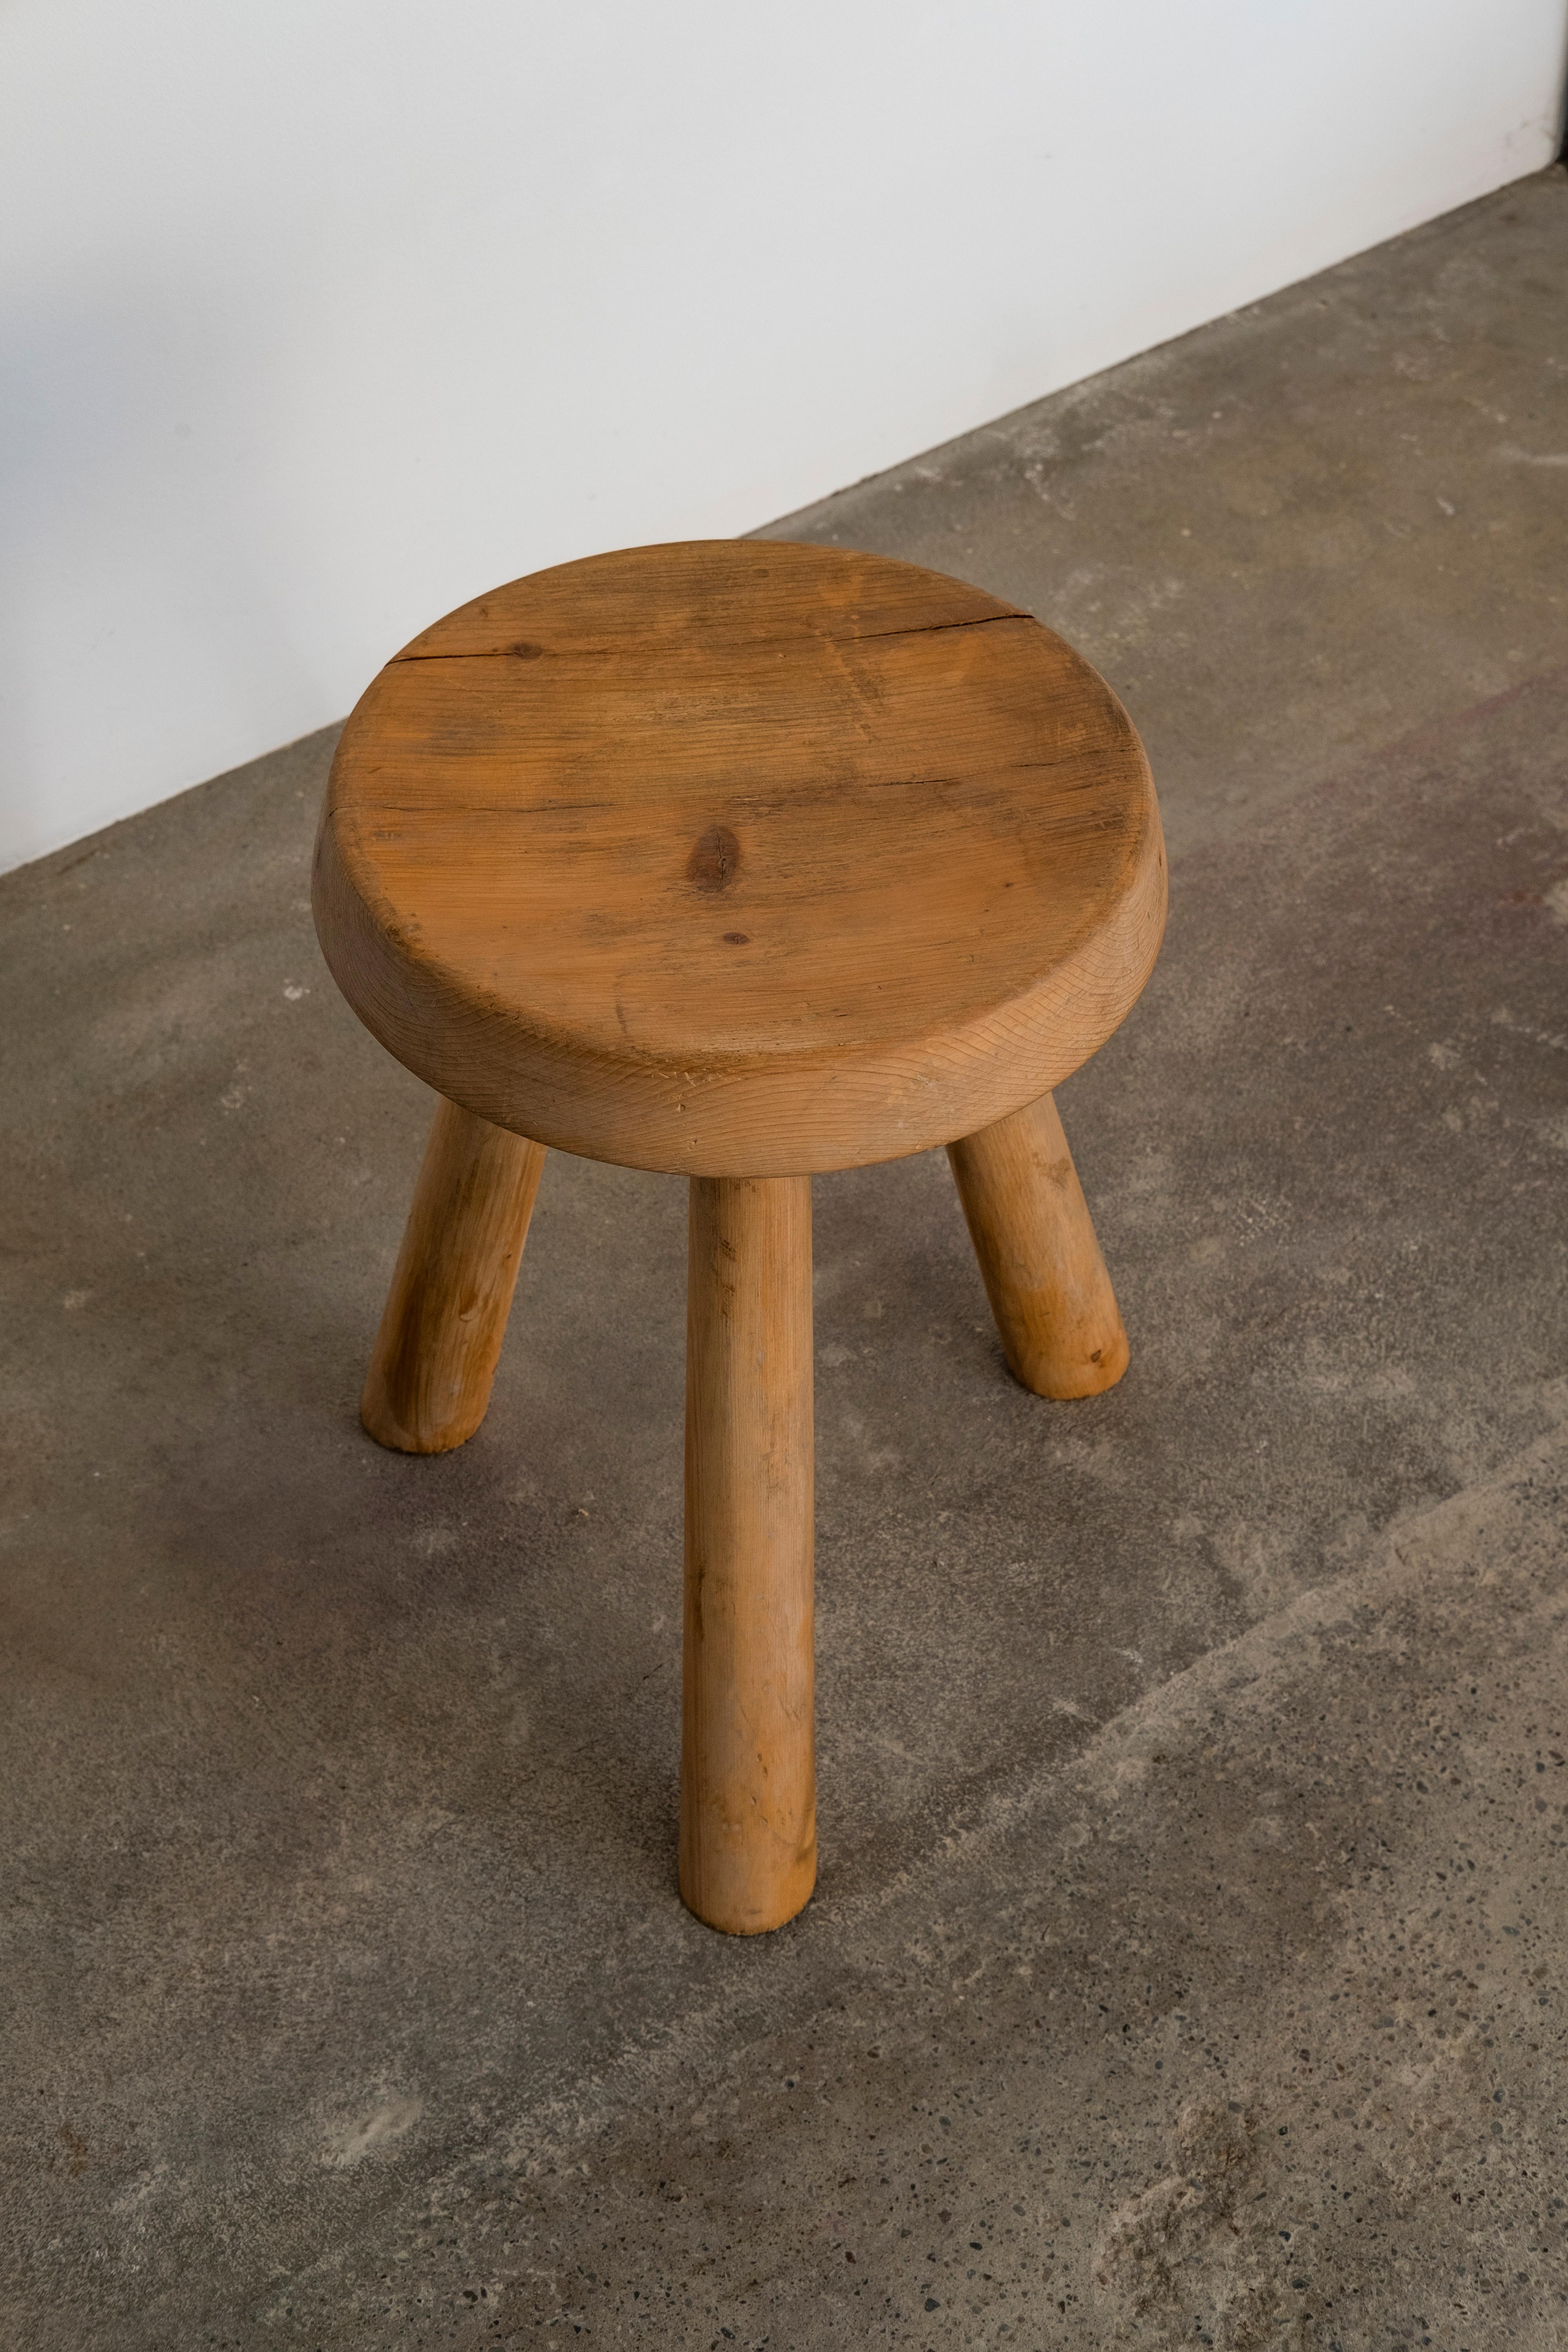 Hand-Crafted Charlotte Perriand Three-Legged Stool Authentic & Rare Mid-Century Modern For Sale